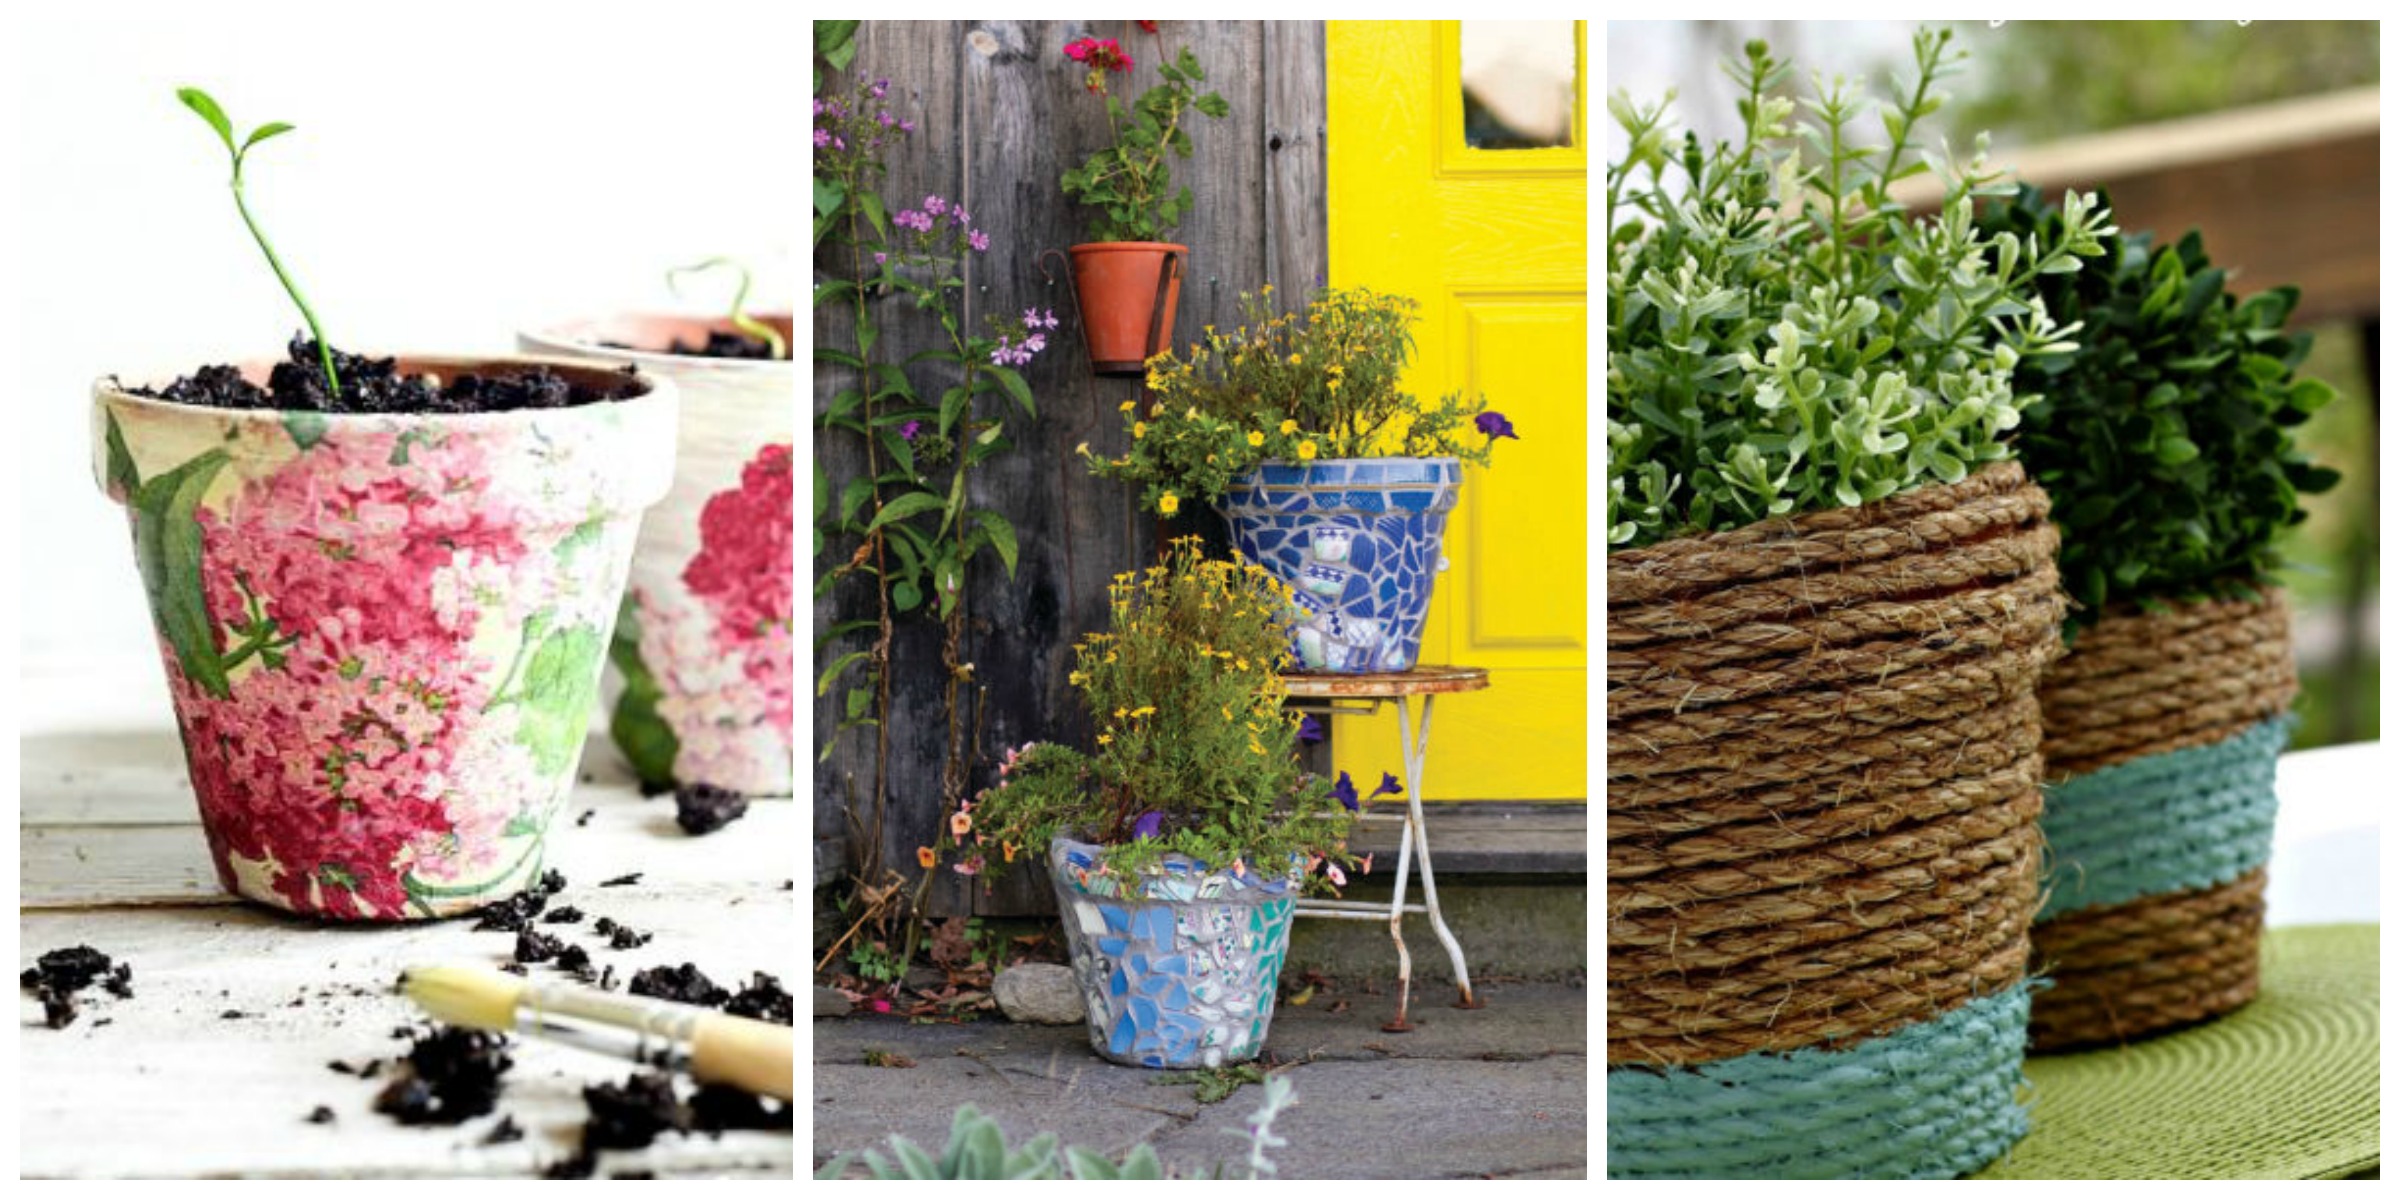 17 Cool Ways To Decorate Your Flower Pots